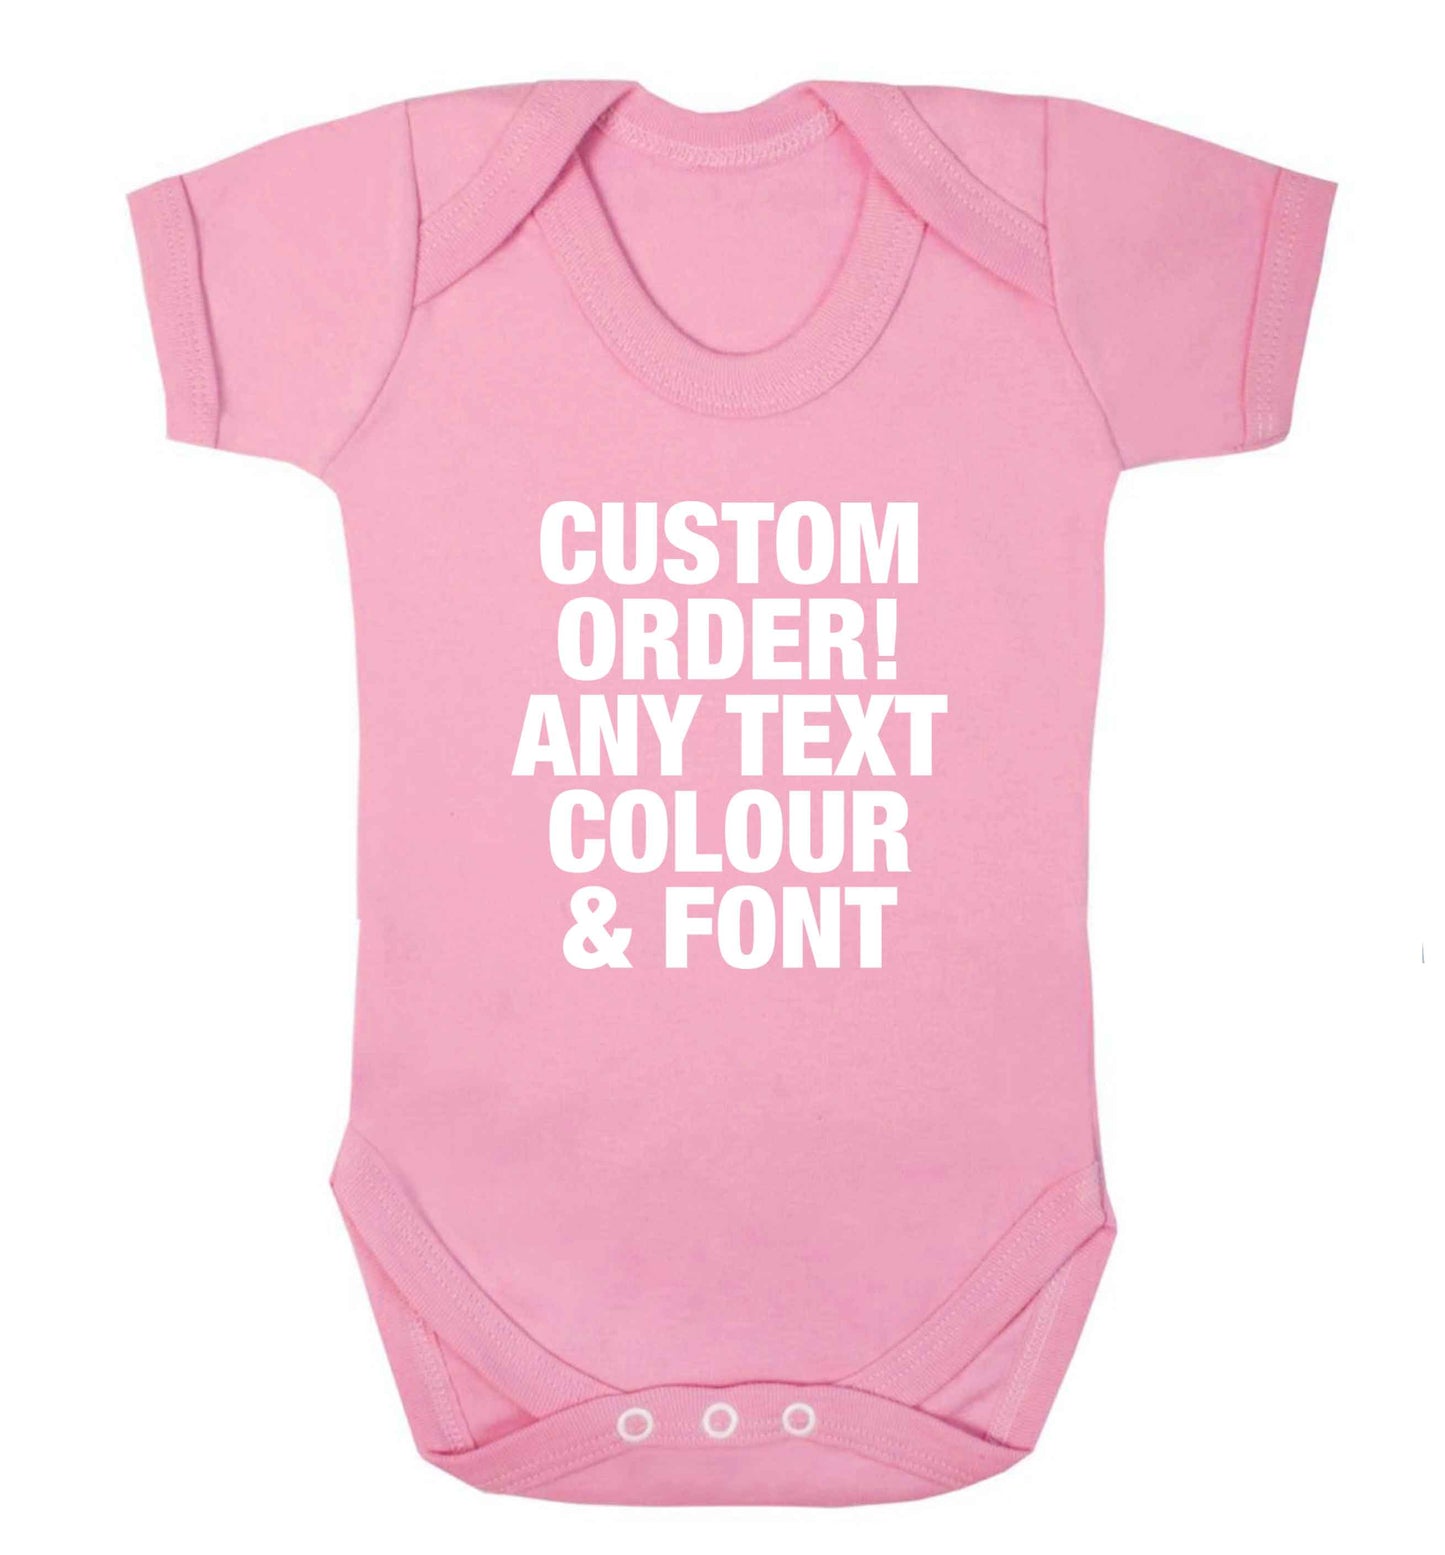 Custom order any text colour and font baby vest pale pink 18-24 months